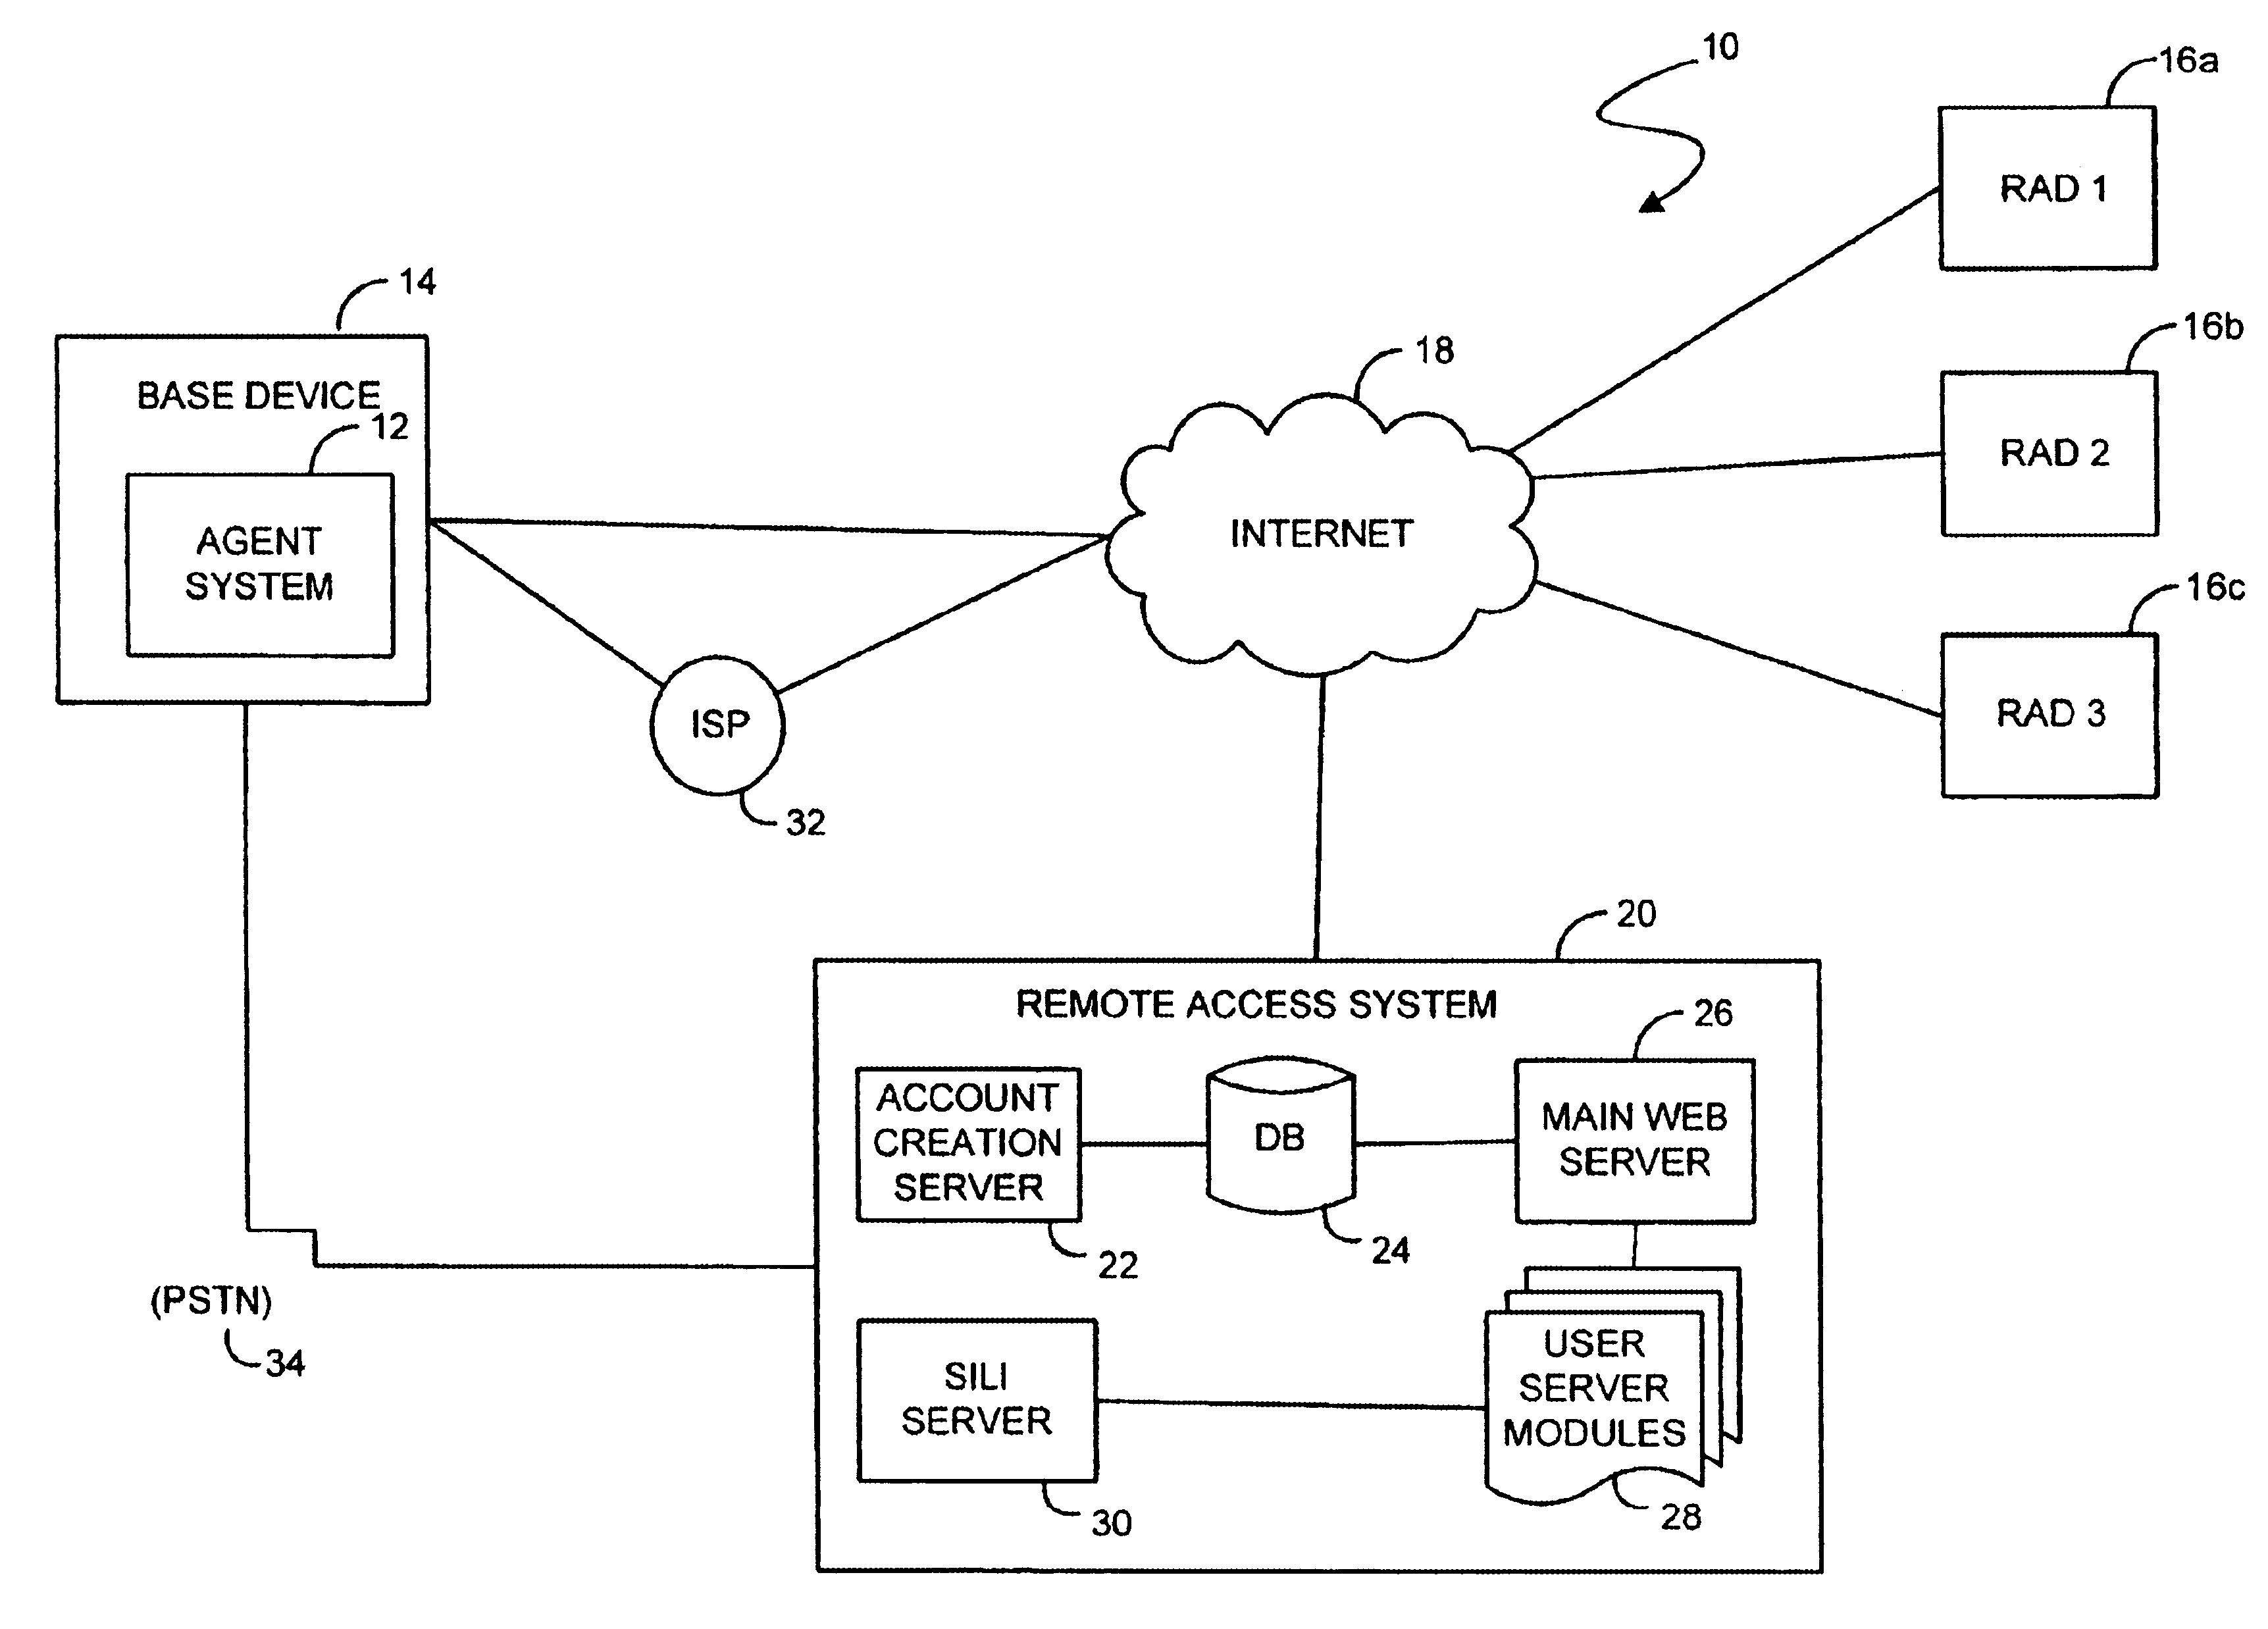 Agent system for a secure remote access system